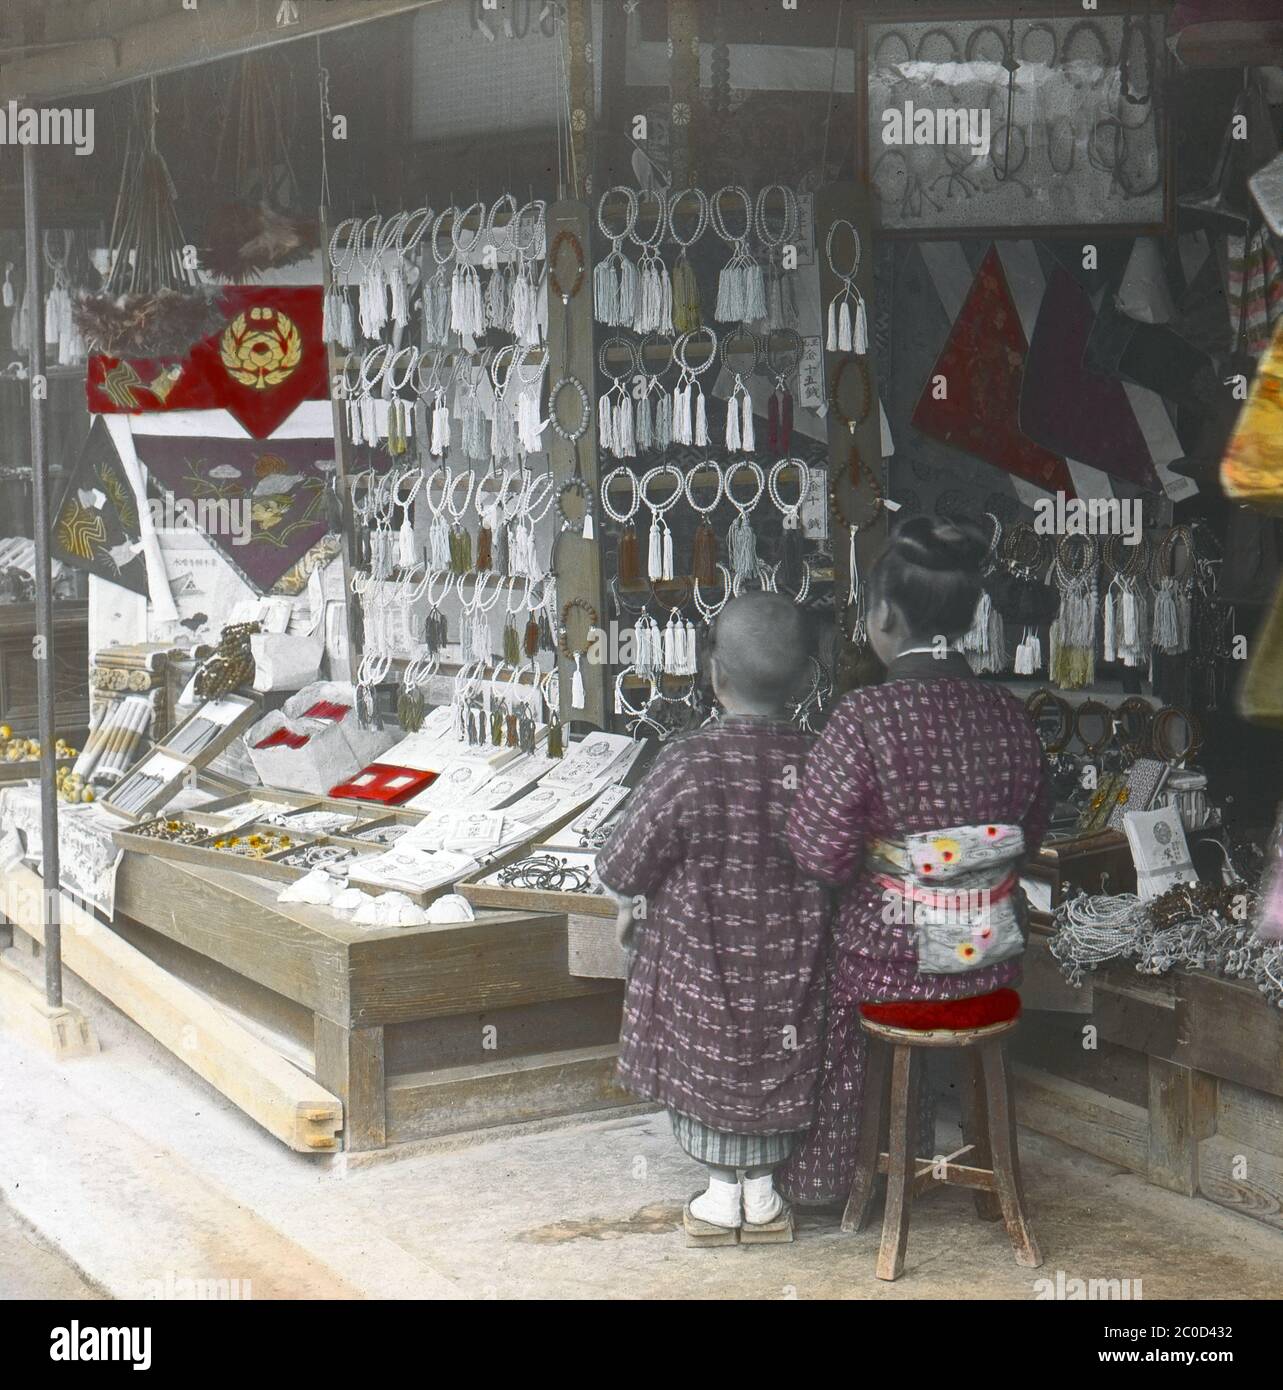 [ 1900s Japan - Prayer Beads Shop ] — A Japanese shop specializing in Buddhist prayer beads are known as ojuzu (数珠, counting beads) or onenju (念珠, thought beads).  20th century vintage glass slide. Stock Photo